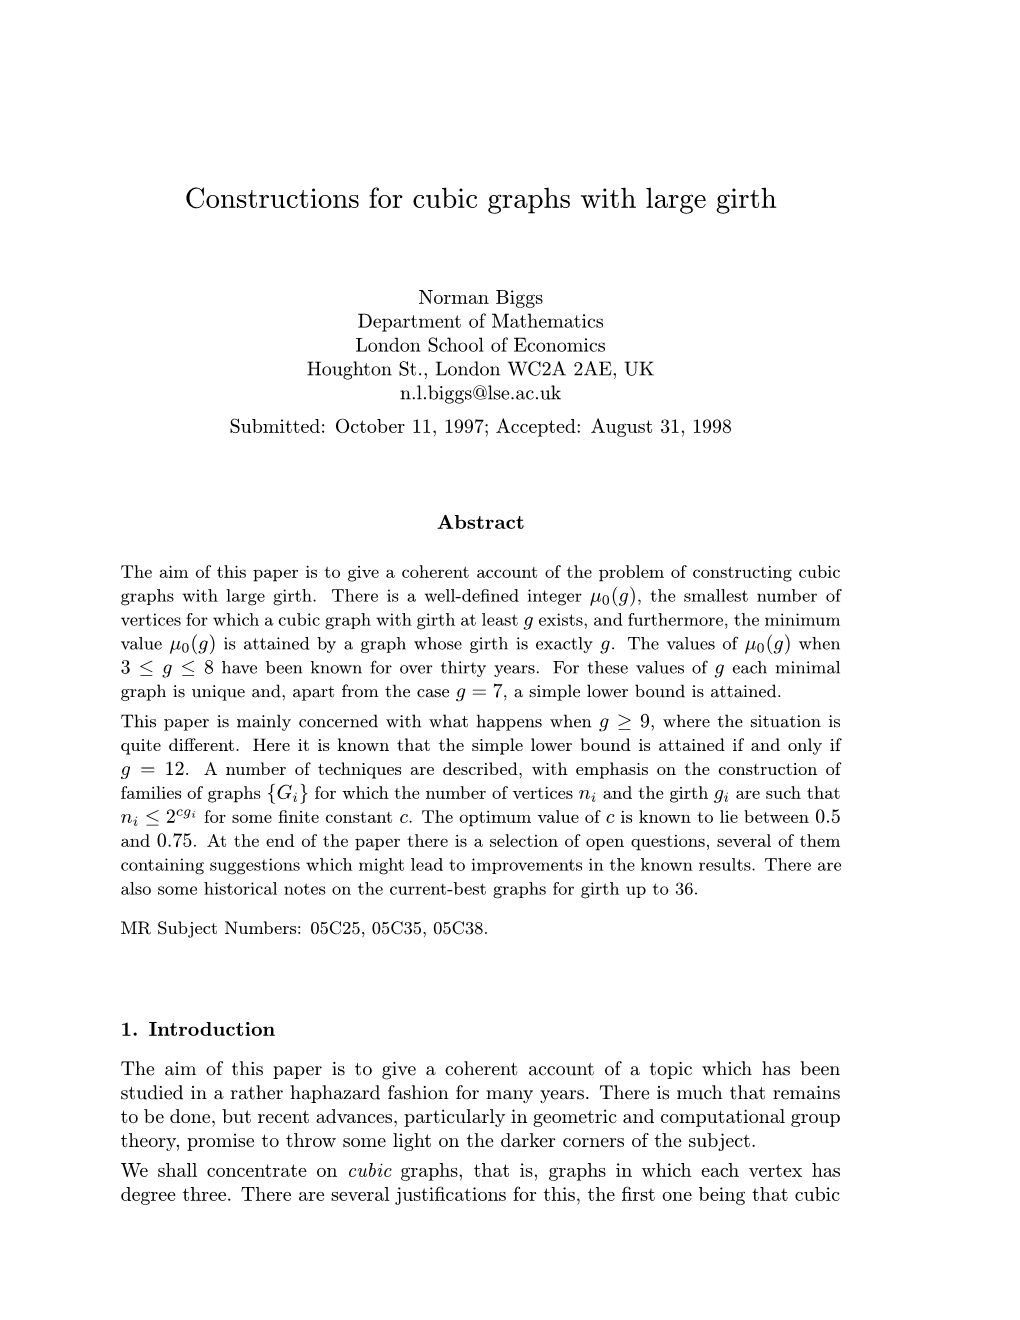 Constructions for Cubic Graphs with Large Girth